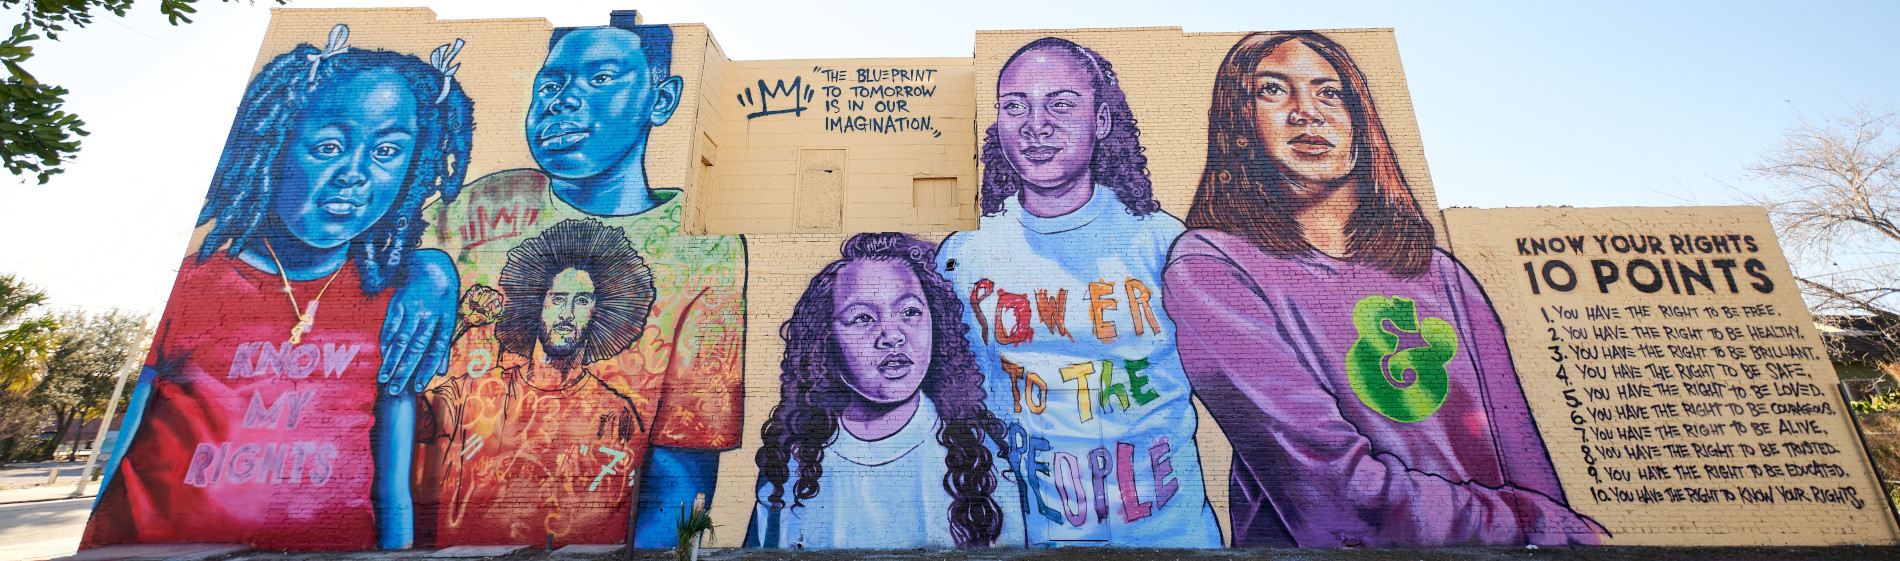 Mural on Moses White Blvd. featuring portraits of Tampa youth alongside Know Your Rights Camp volunteers